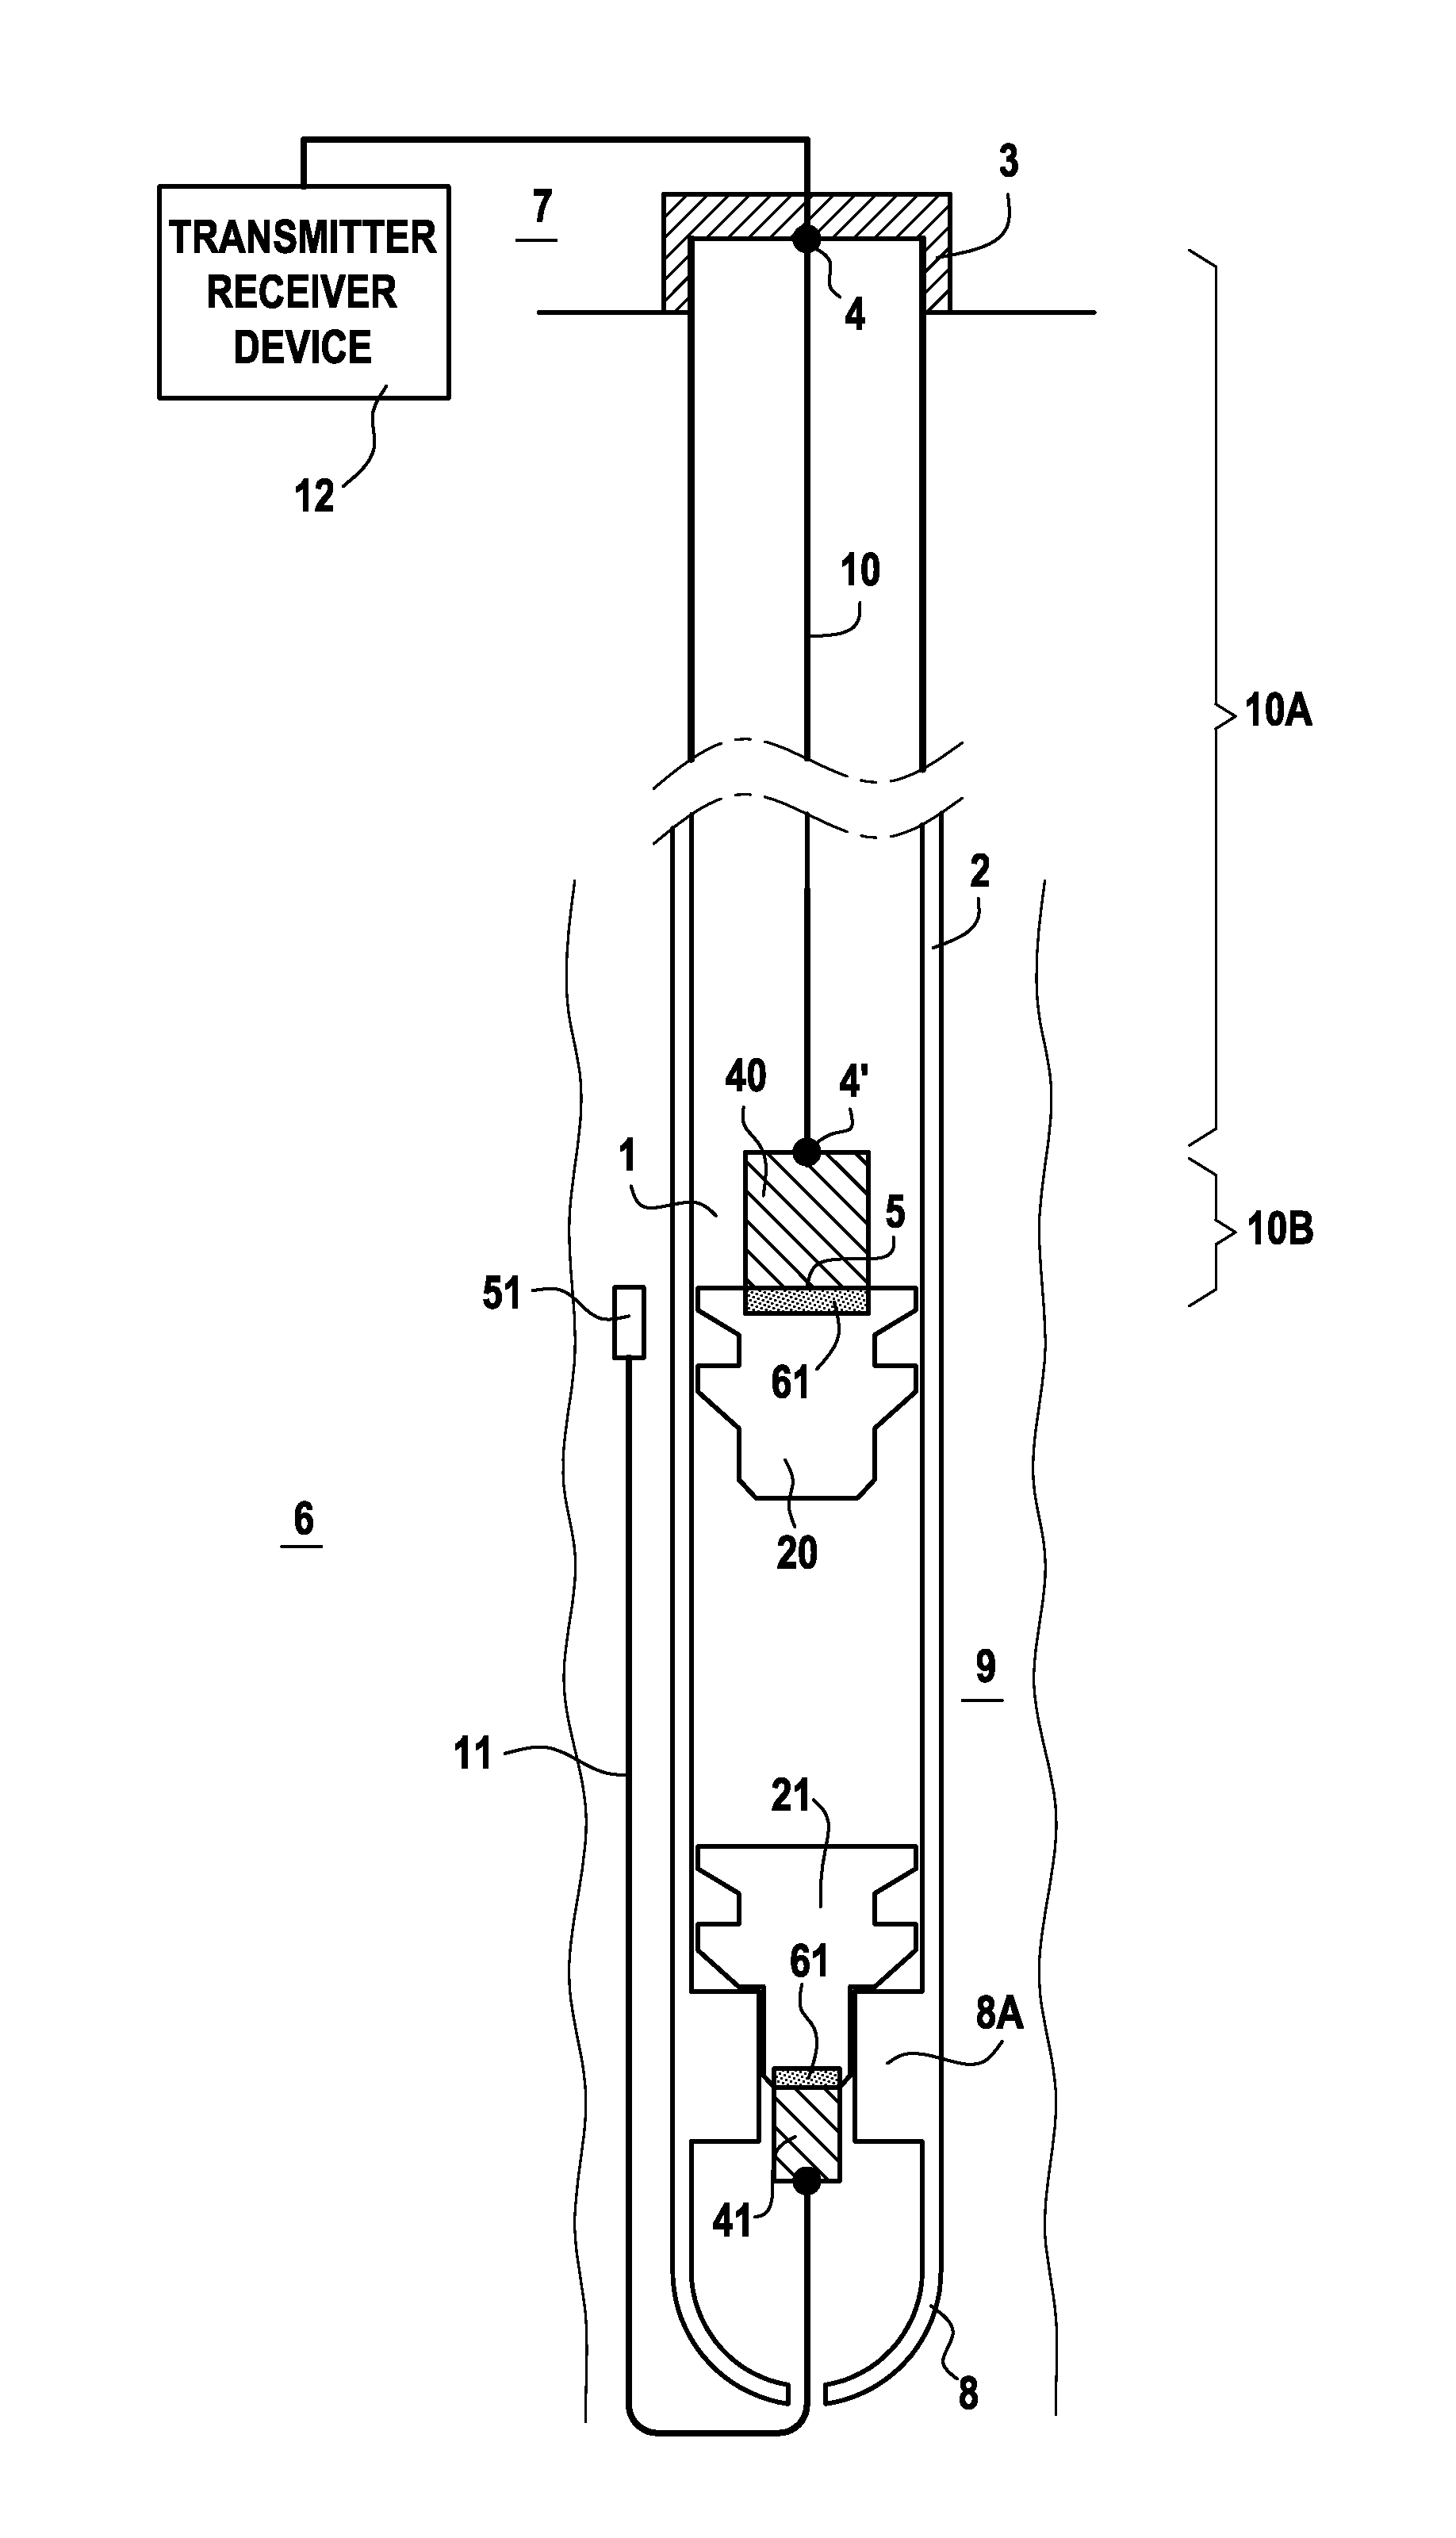 Method and Apparatus for Measuring a Parameter within the Well with a Plug